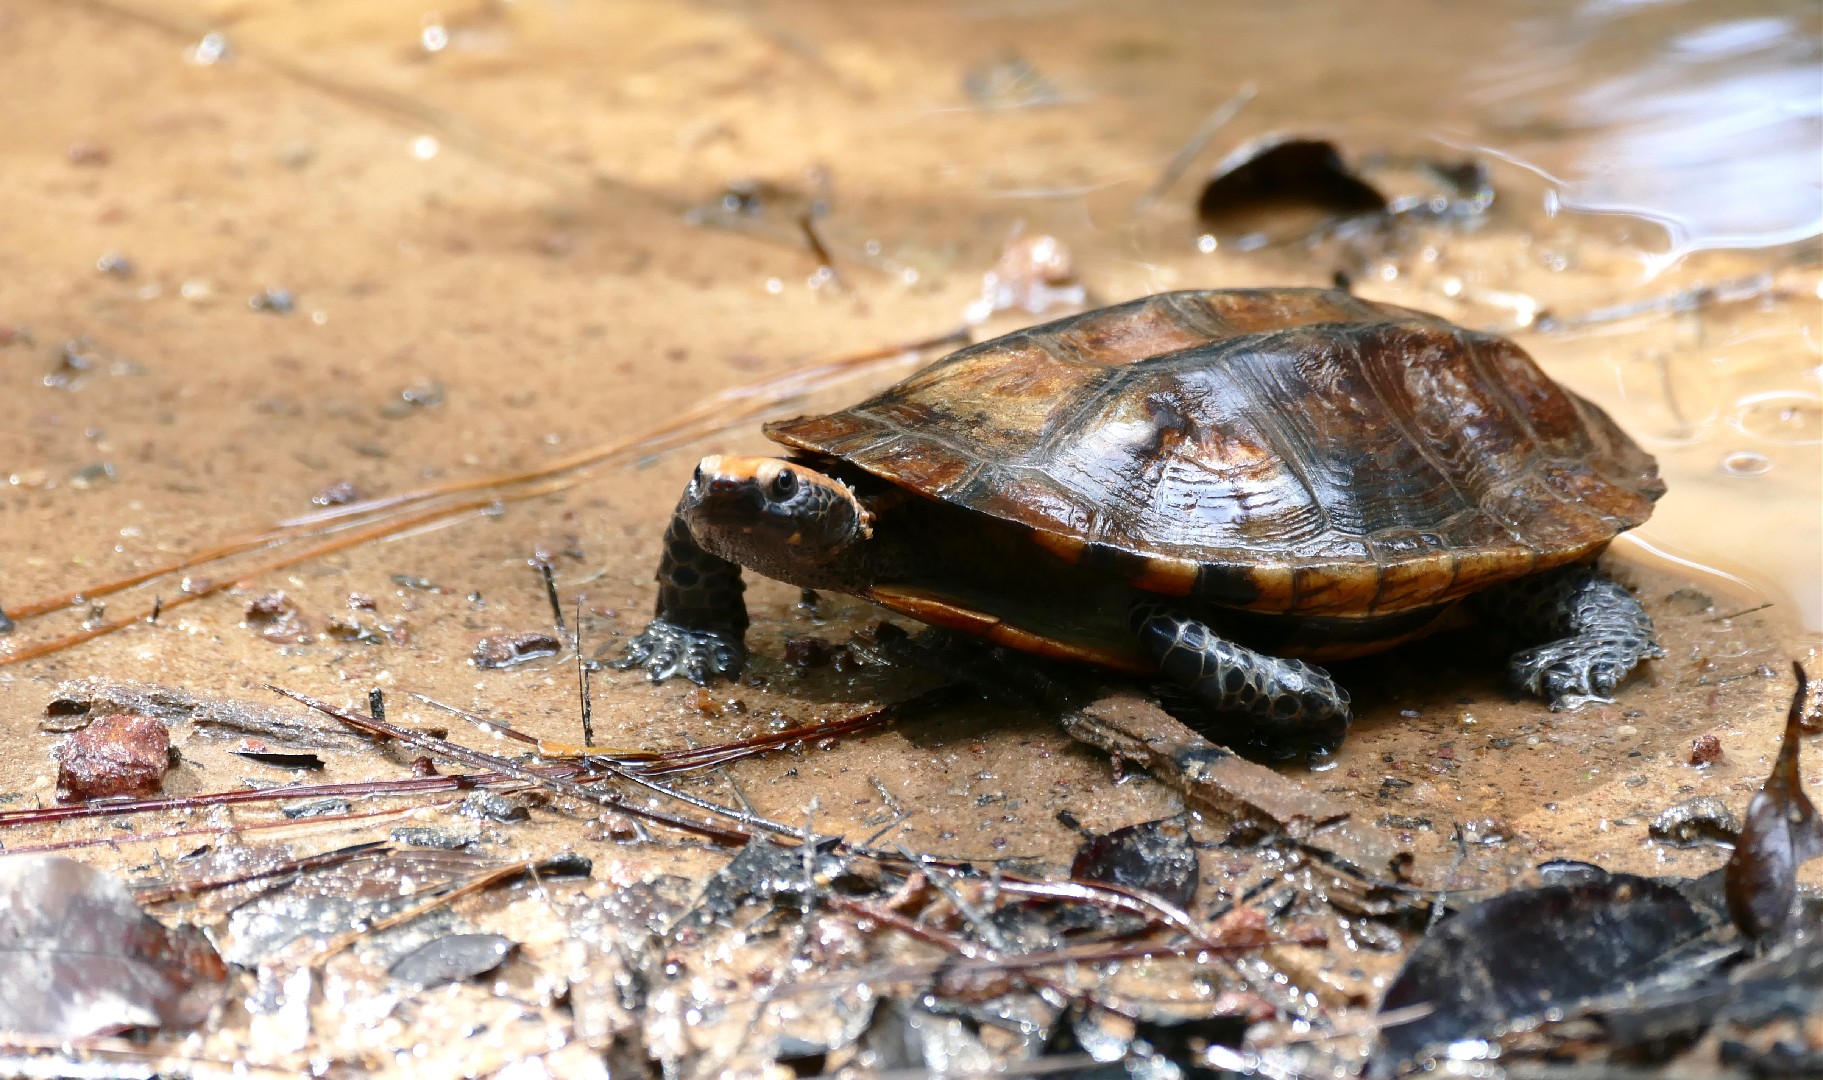 Twisted-necked turtles (Platemys)